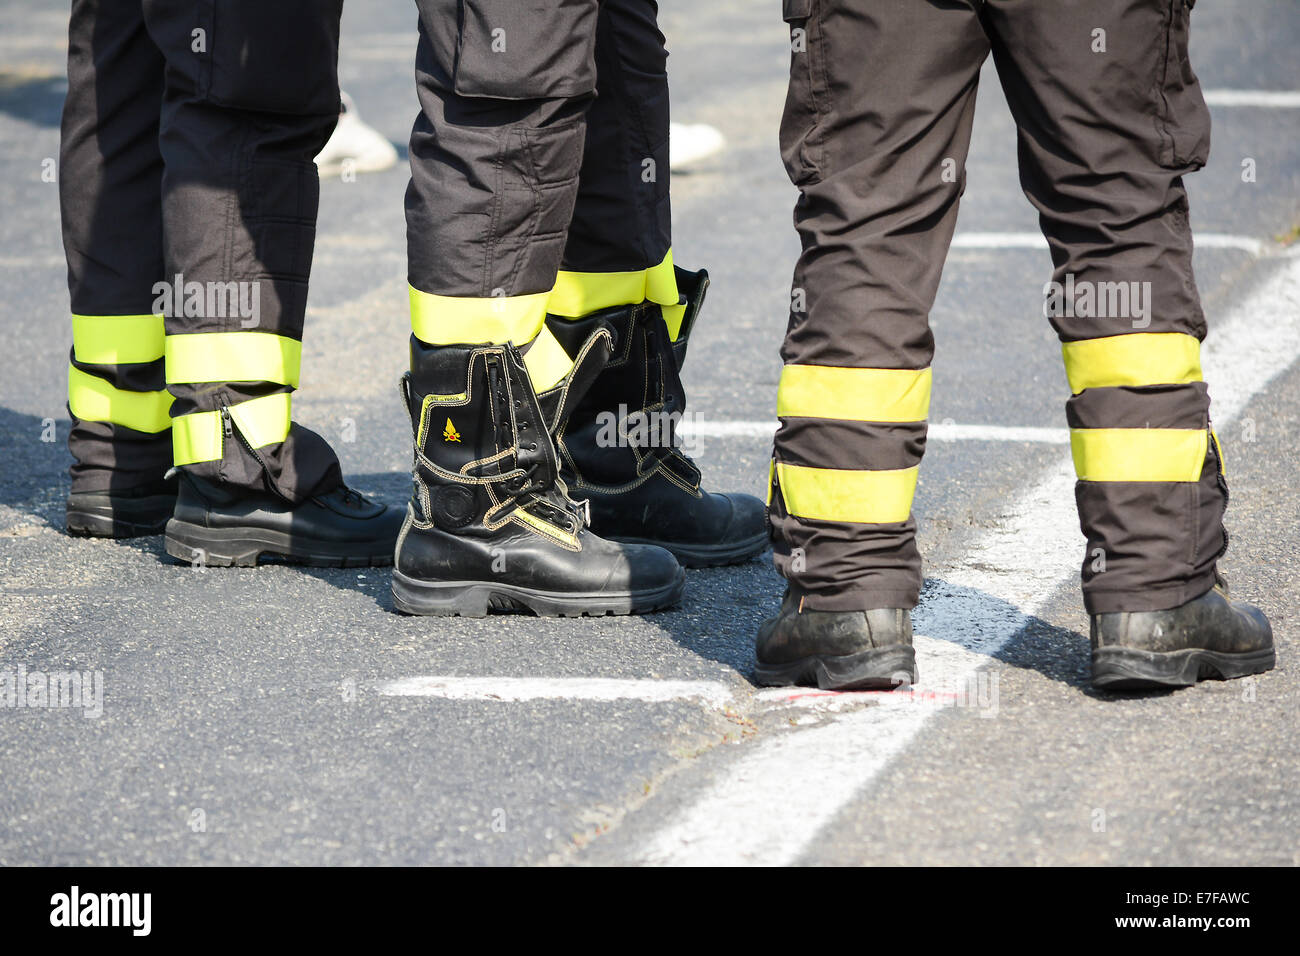 bologna,Italy-June 7,2014:three firefighters oversee the situation during the course of a sporting event in bologna in a sunny d Stock Photo